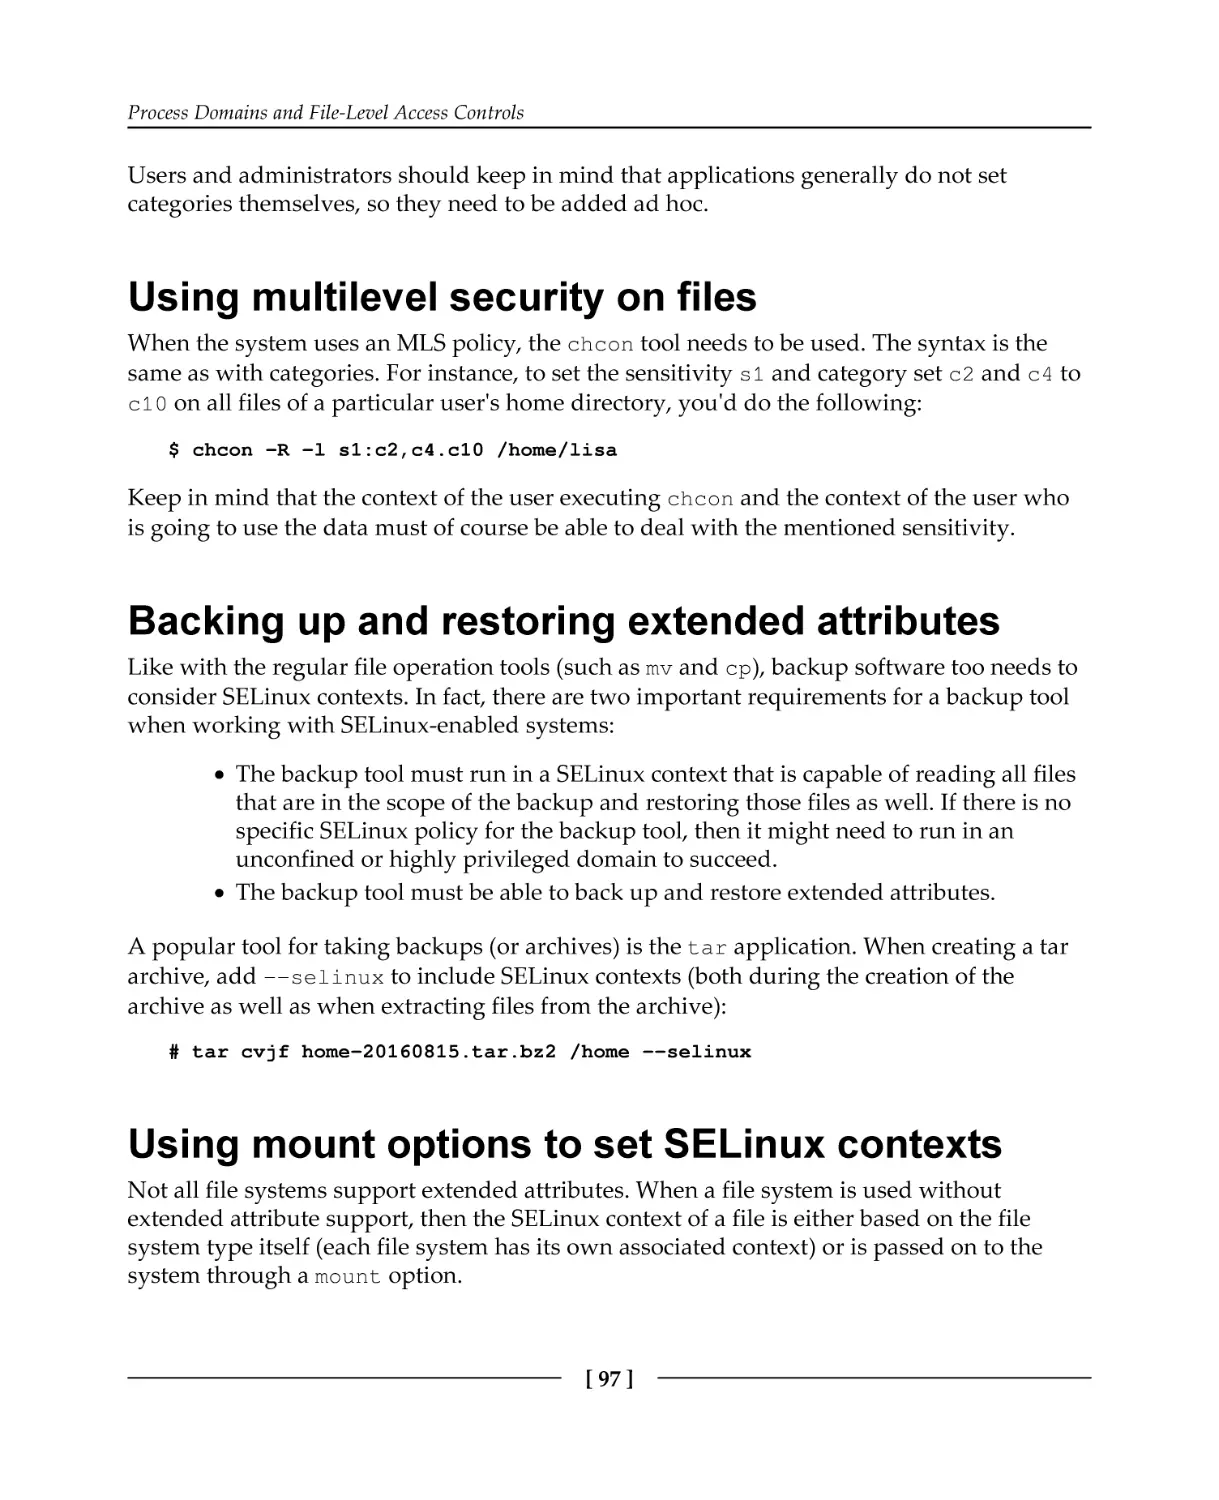 Using multilevel security on files
Backing up and restoring extended attributes
Using mount options to set SELinux contexts